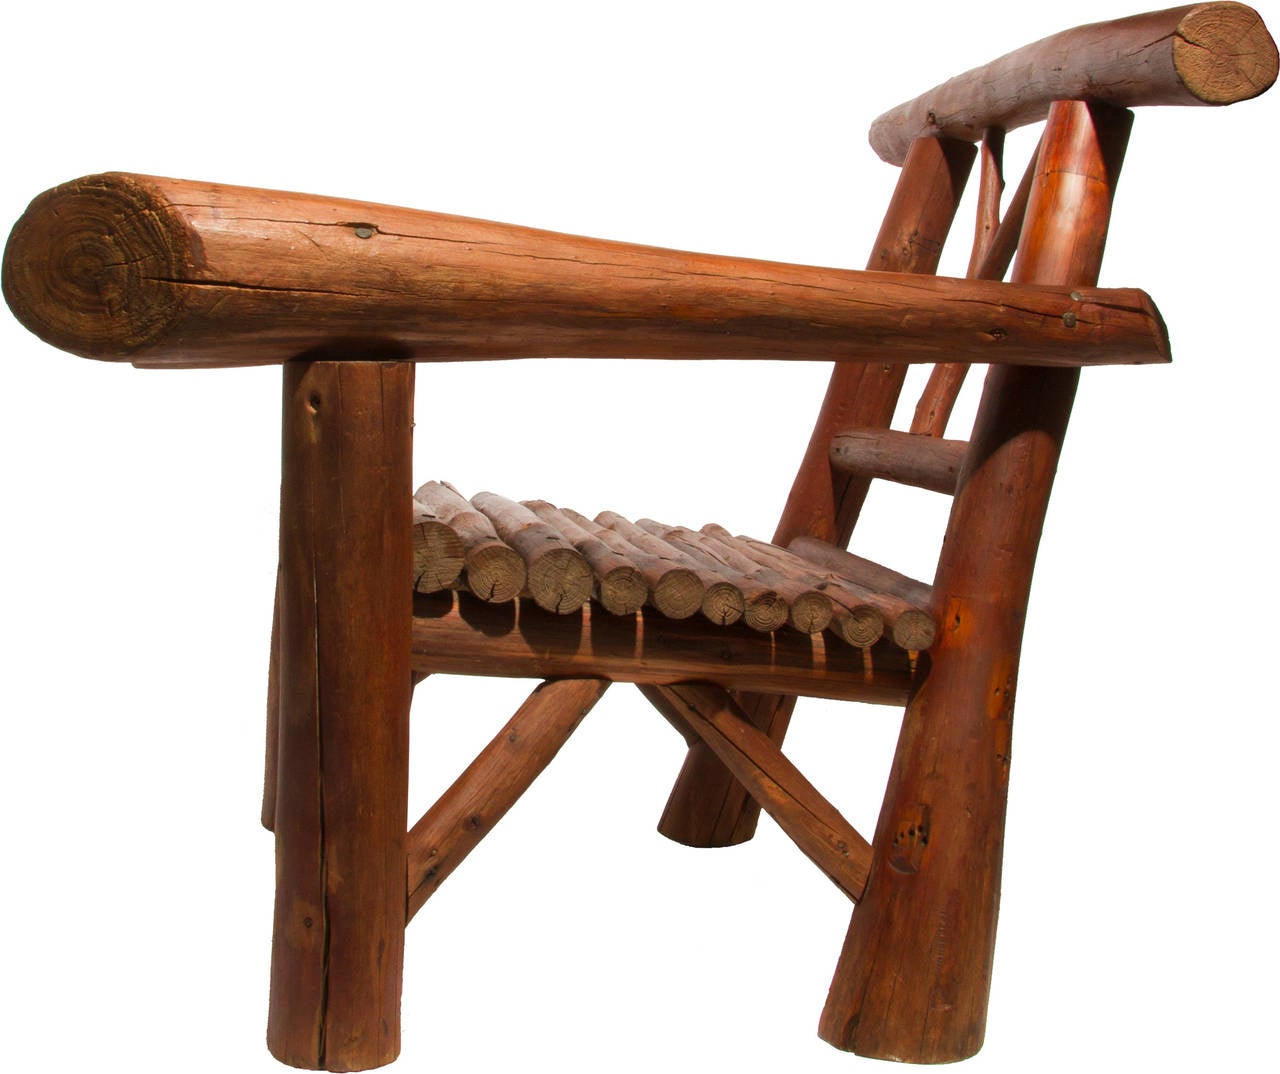 This is a fabulous and historic cypress chair from Florida's infamous Moon Lake lodge. It is rumored that gangster Al Capone hid from the law at Moon Lake Gardens and Dude Ranch, a log cabin-style resort known as 